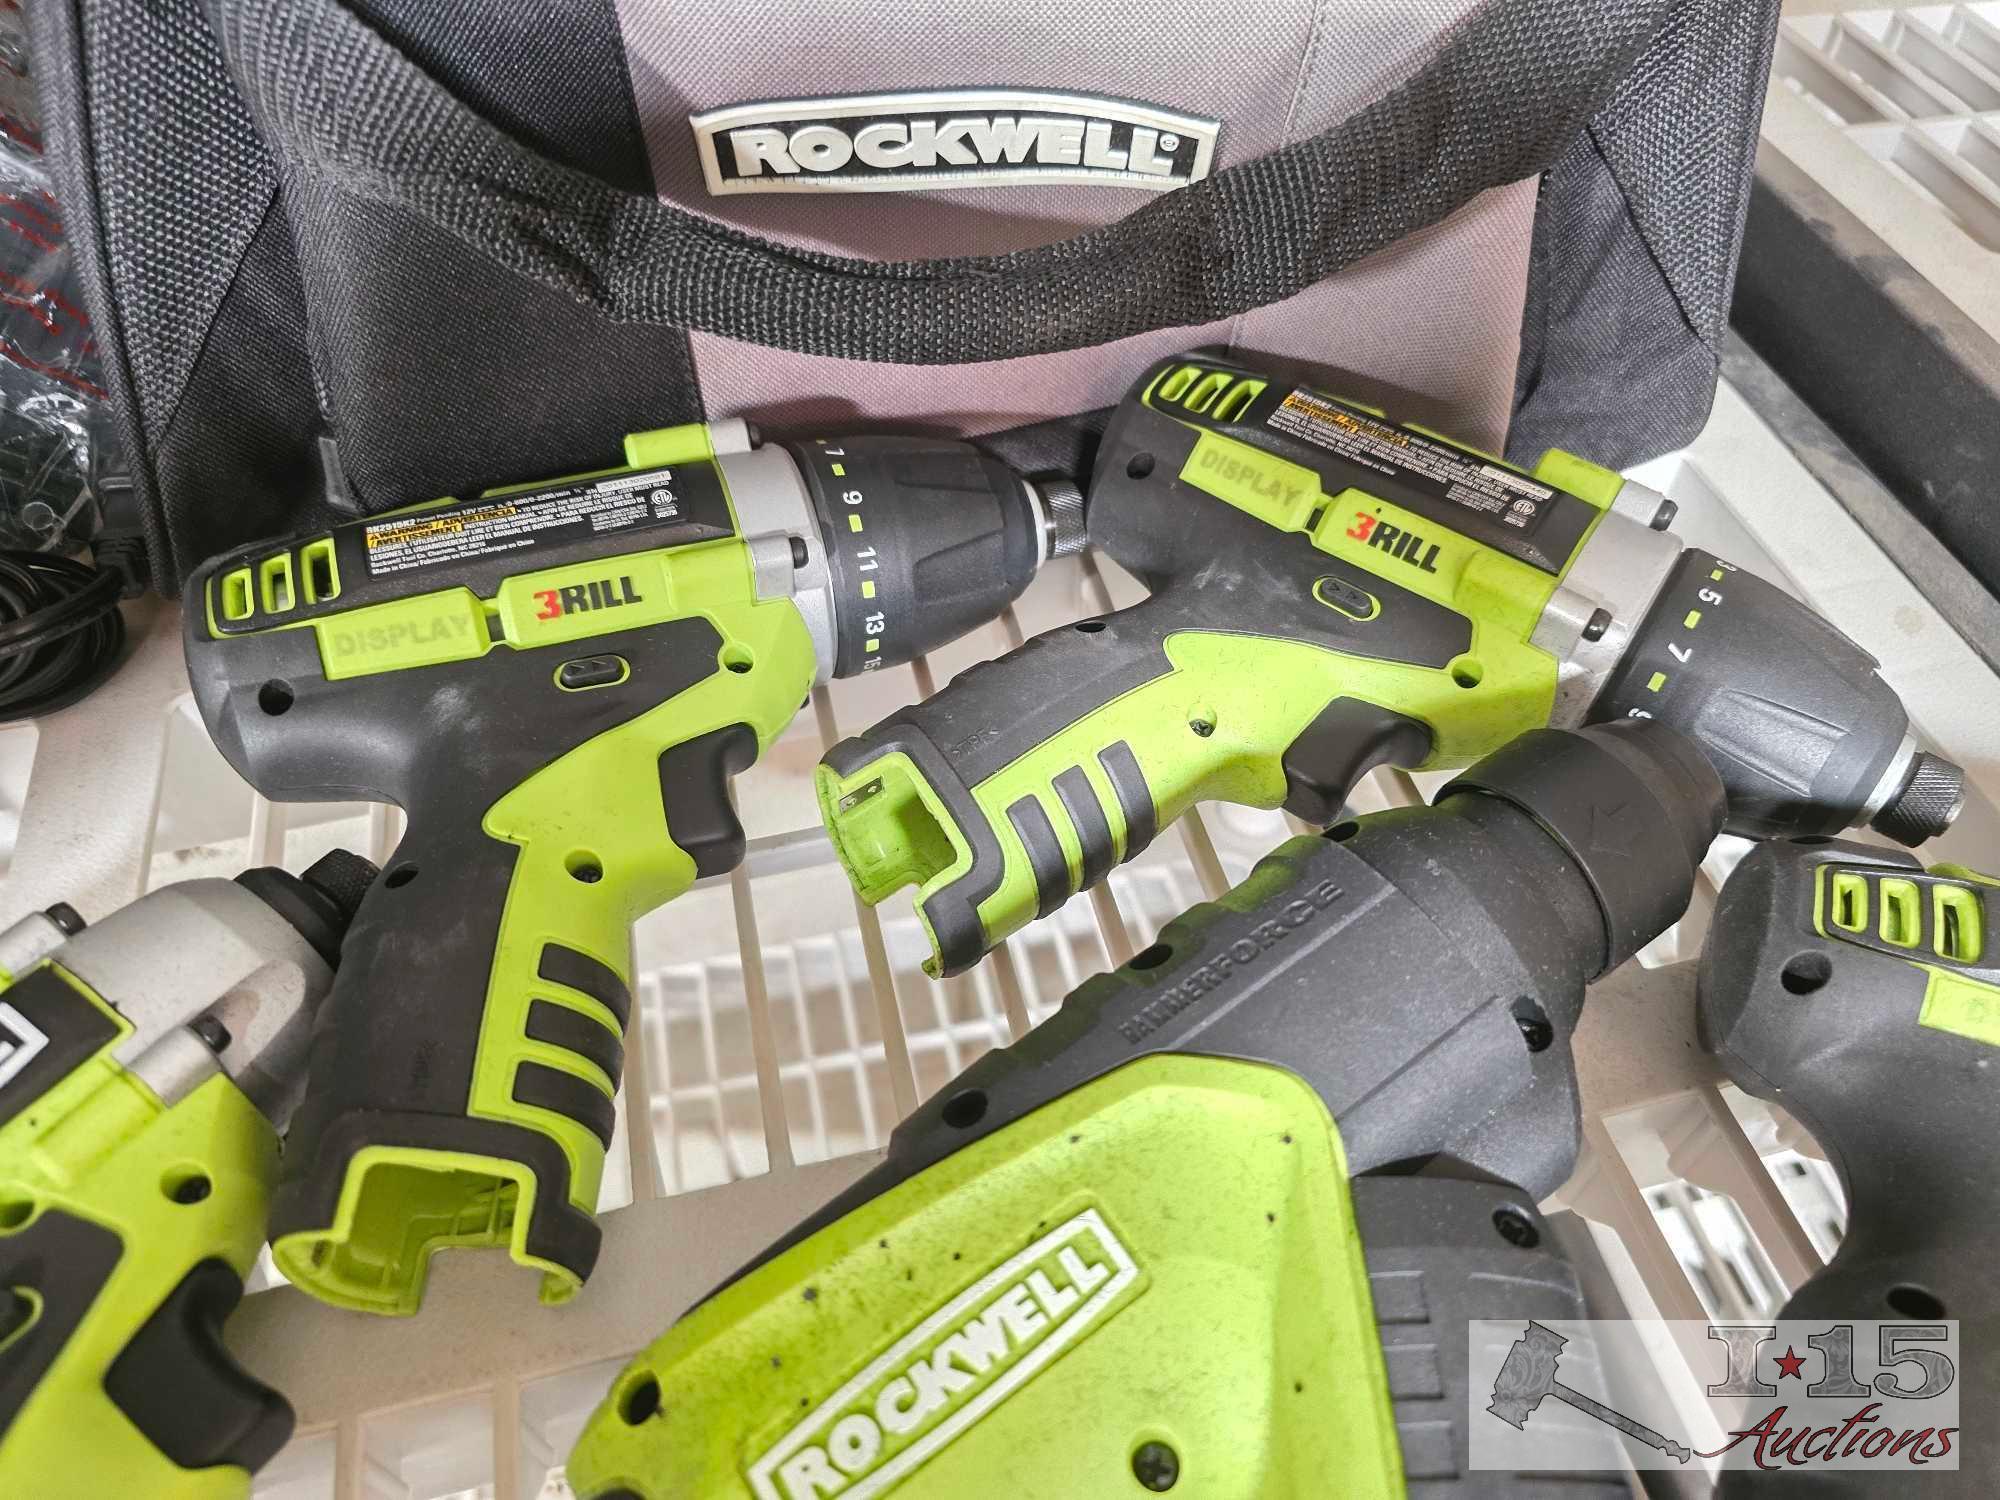 Rockwell Power Tools